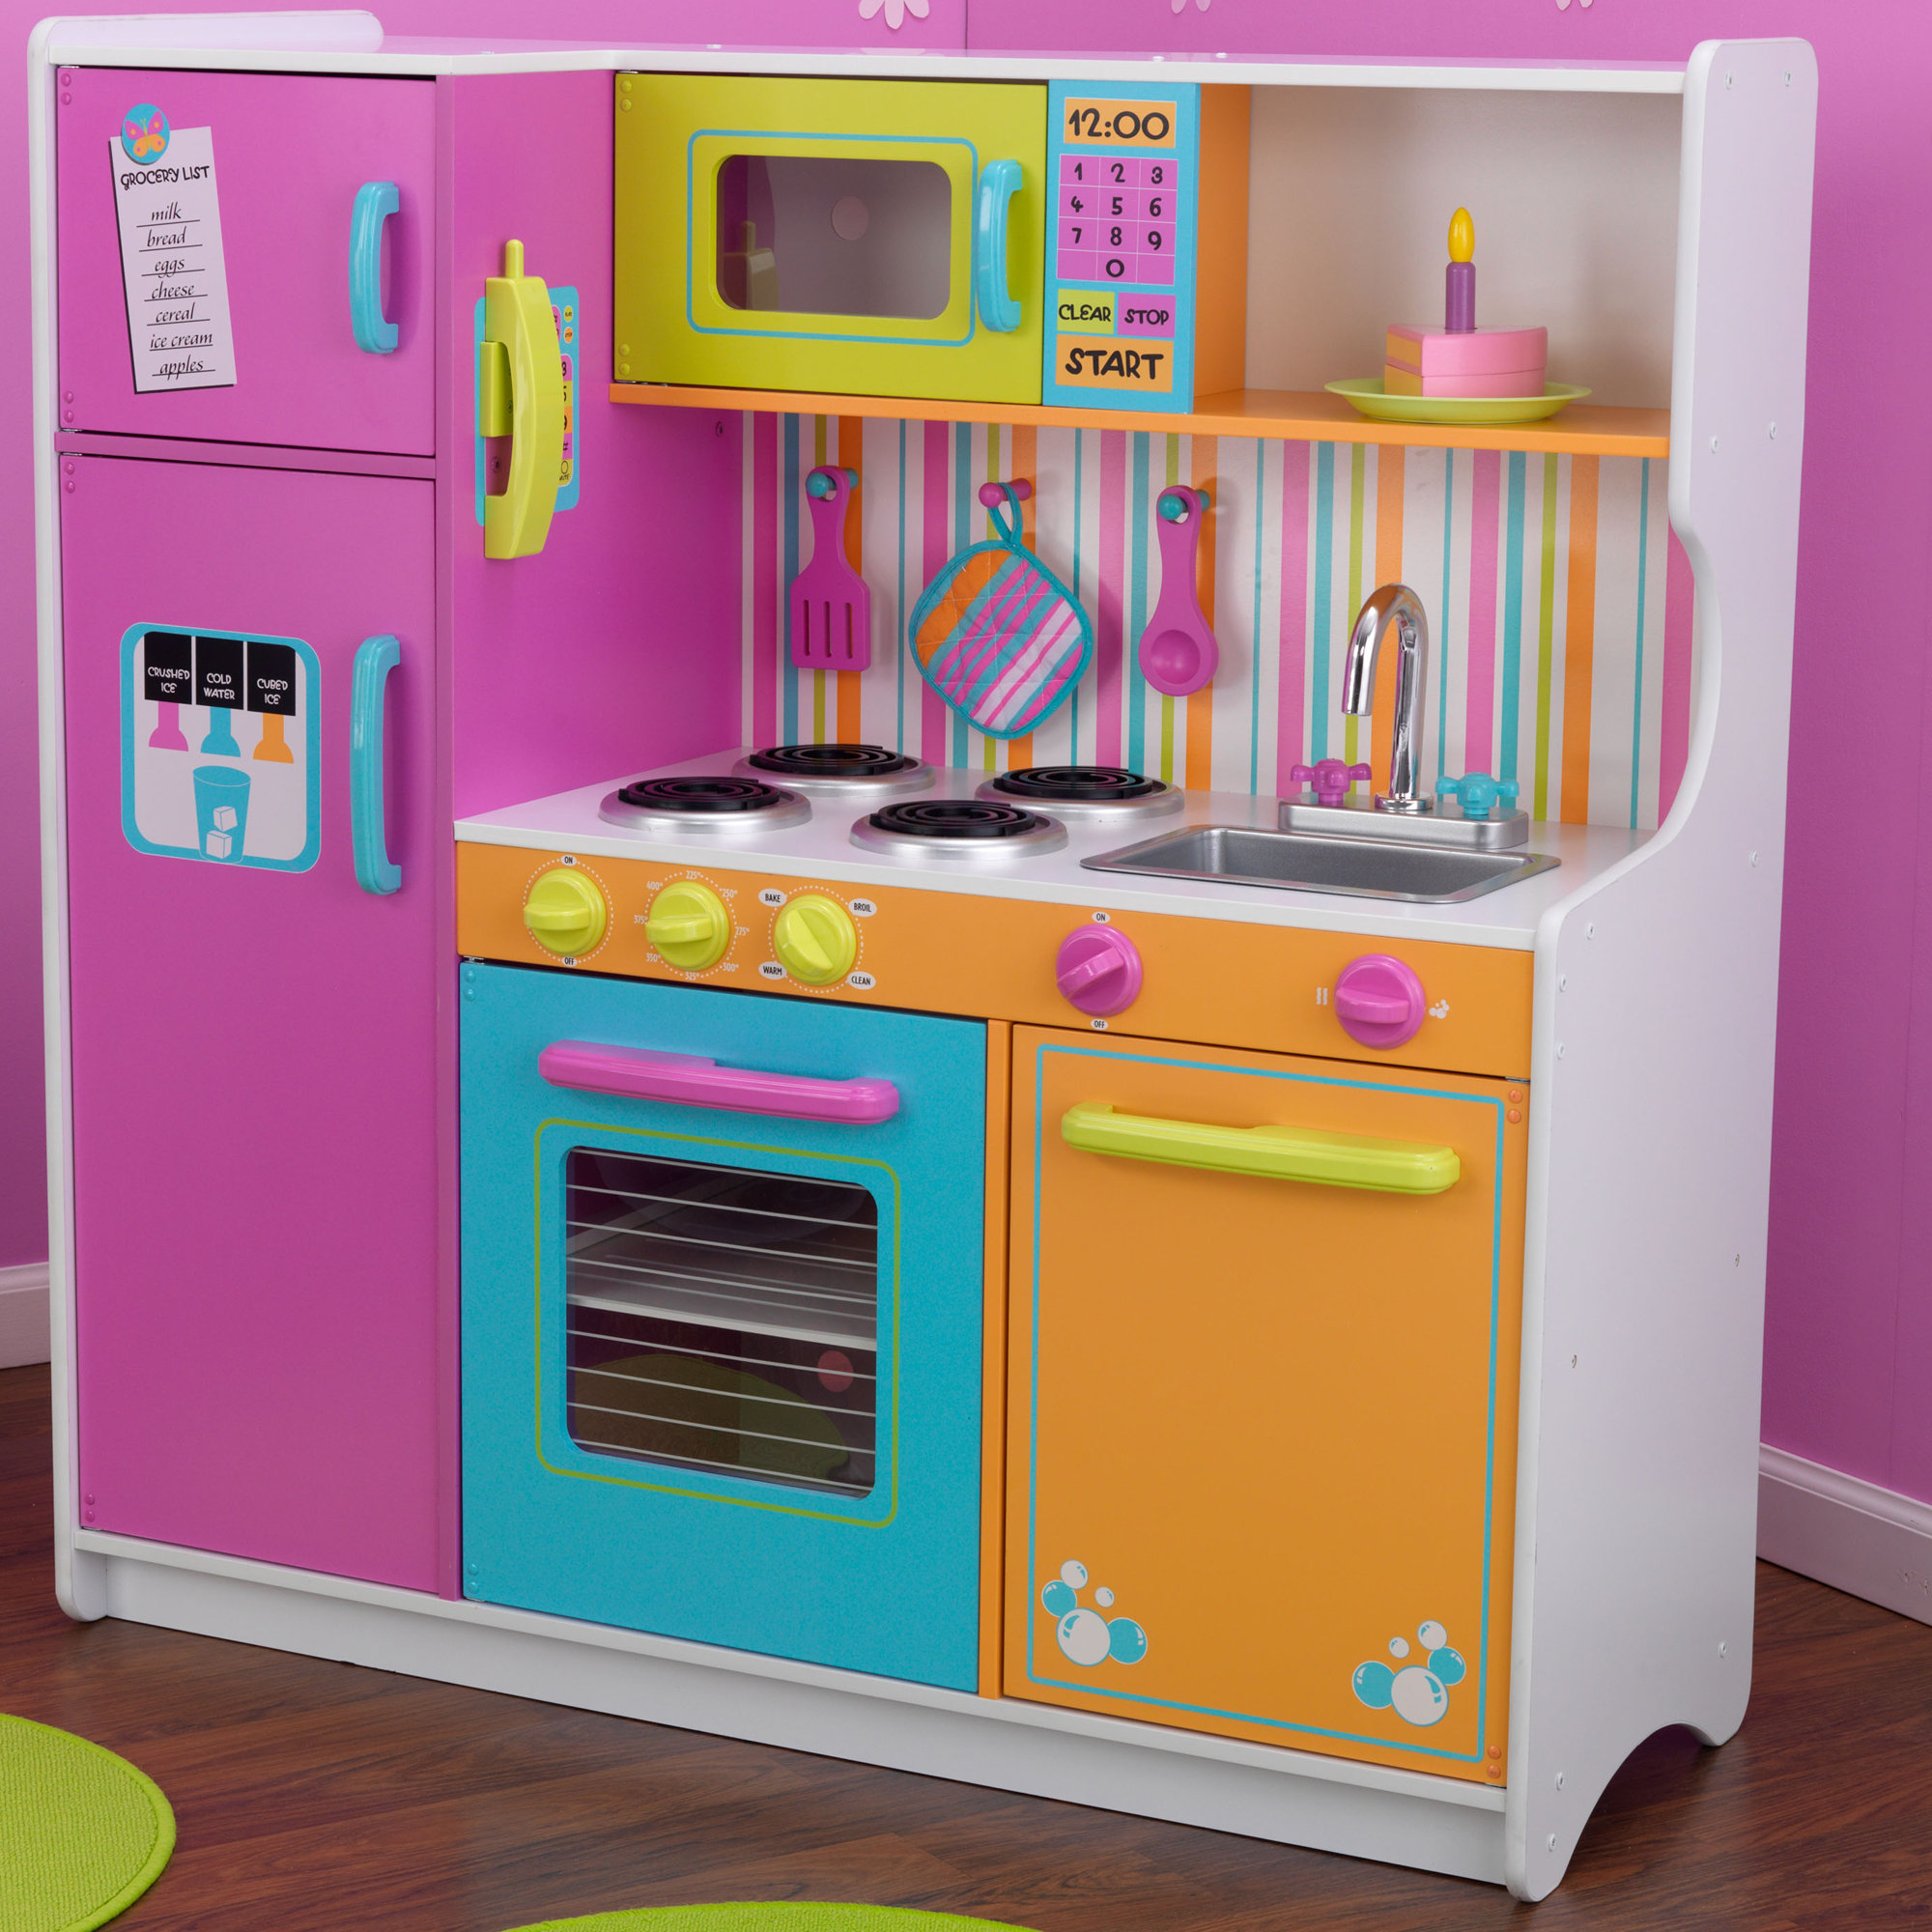 Deluxe Big   Bright Kitchen Play Set 